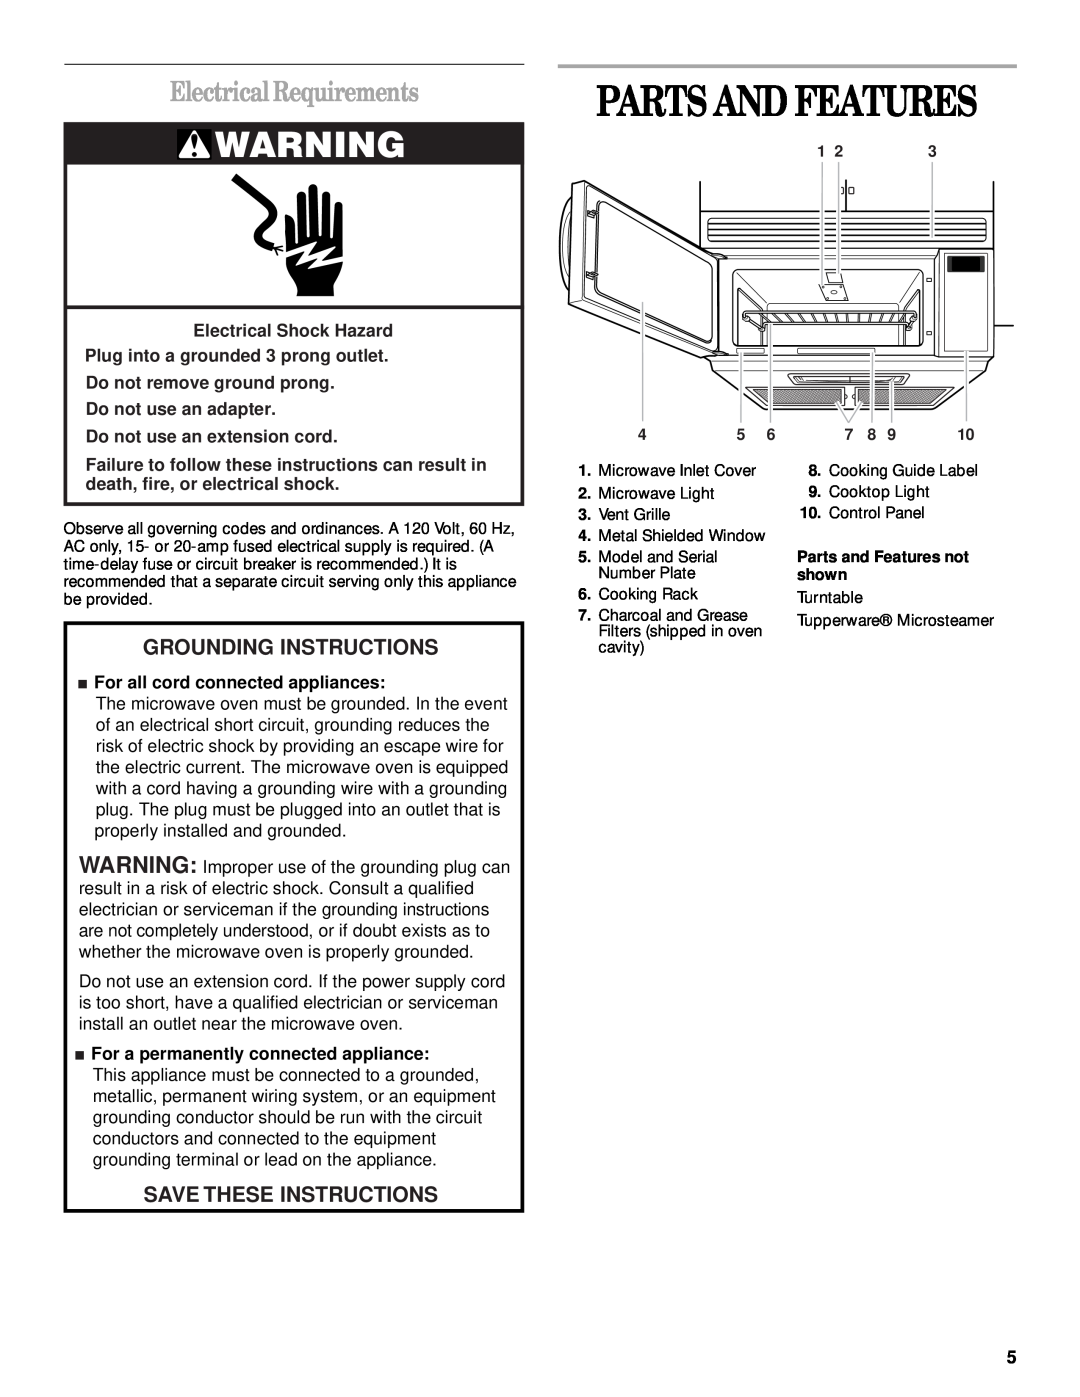 Whirlpool GH8155XJ manual Parts And Features, Electrical Requirements, Grounding Instructions, Save These Instructions 